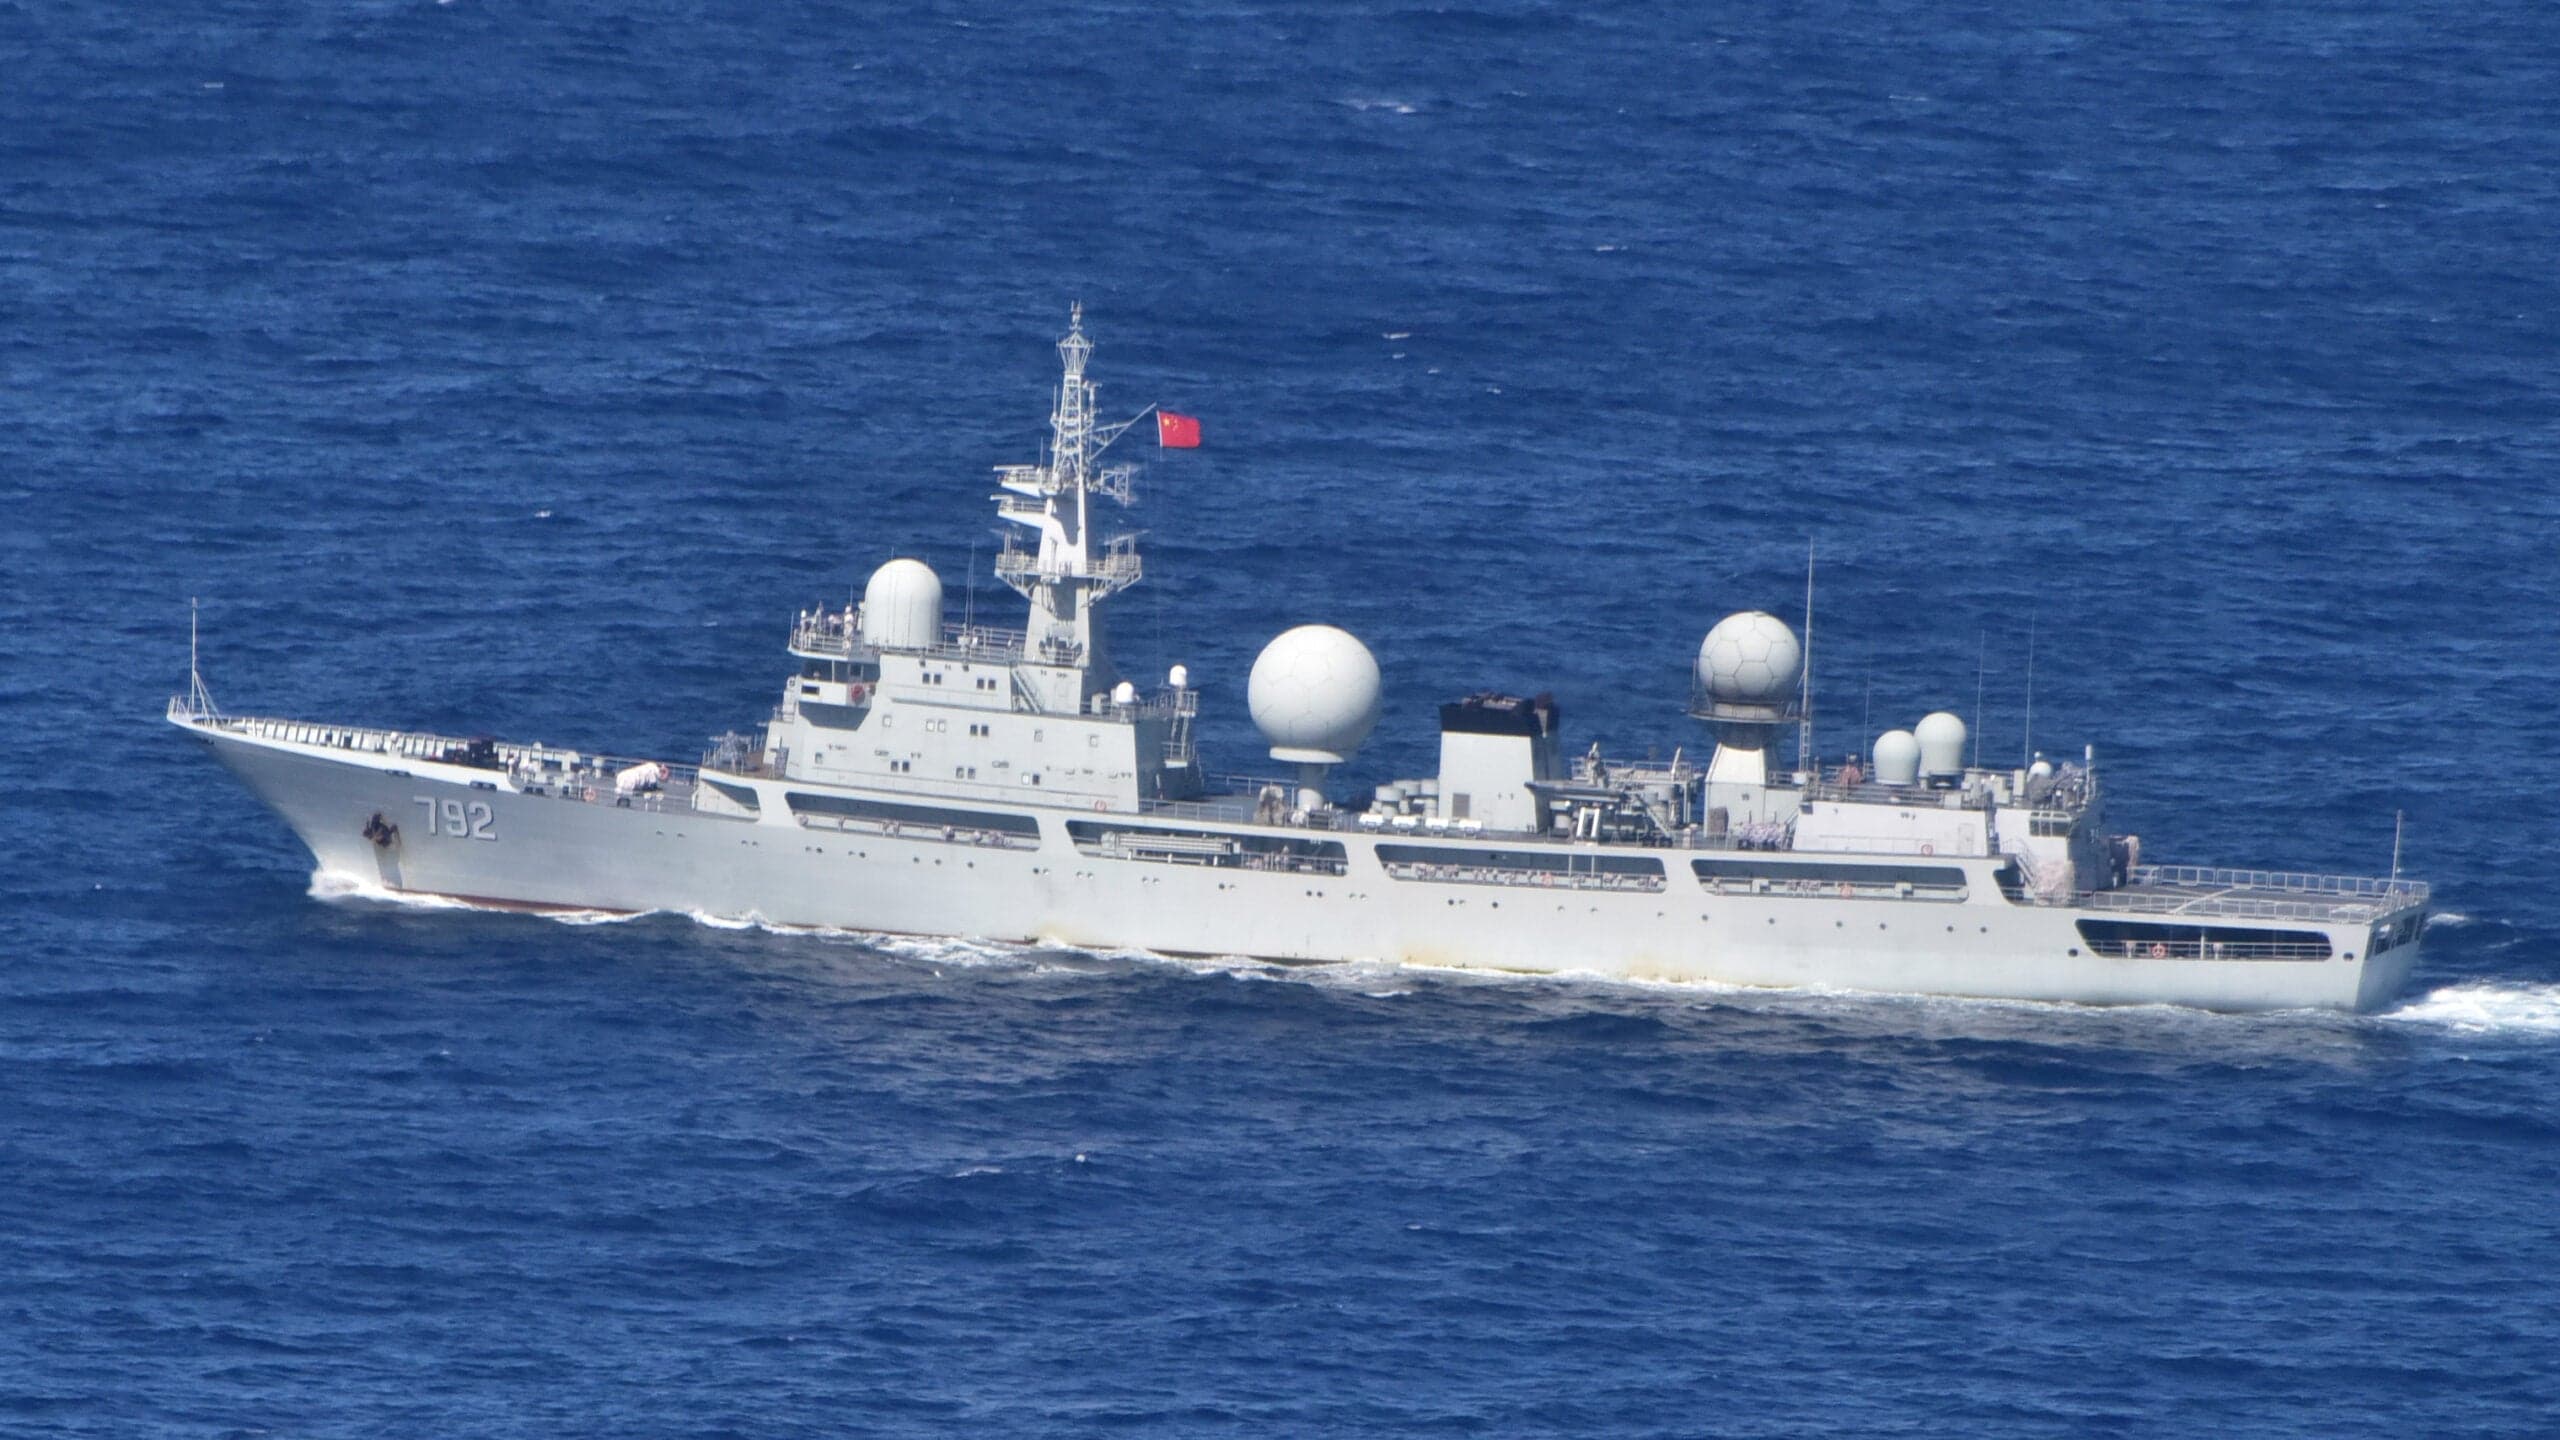 Chinese Spy Ship Makes First Appearance Near Australian Submarine Communications Base